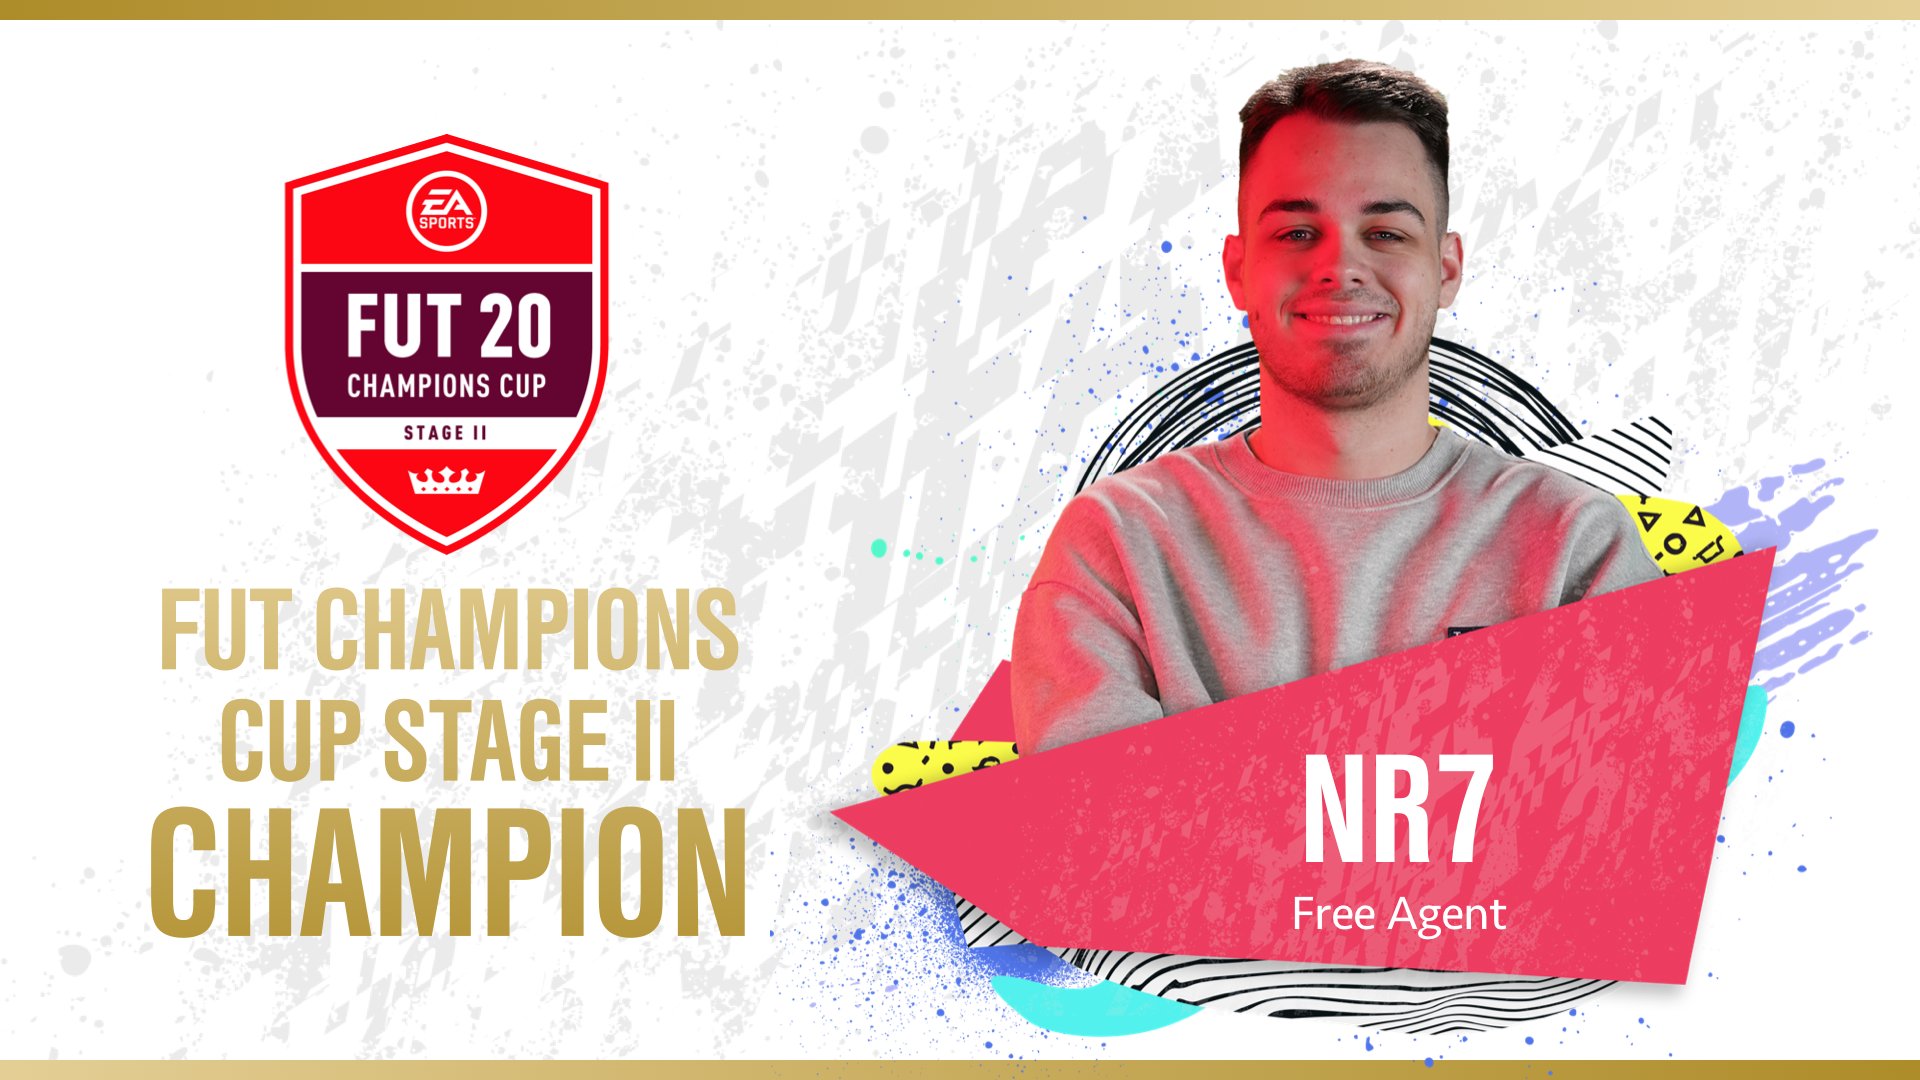 Nraseck slays giants on way to victory in FUT Champions Cup 2